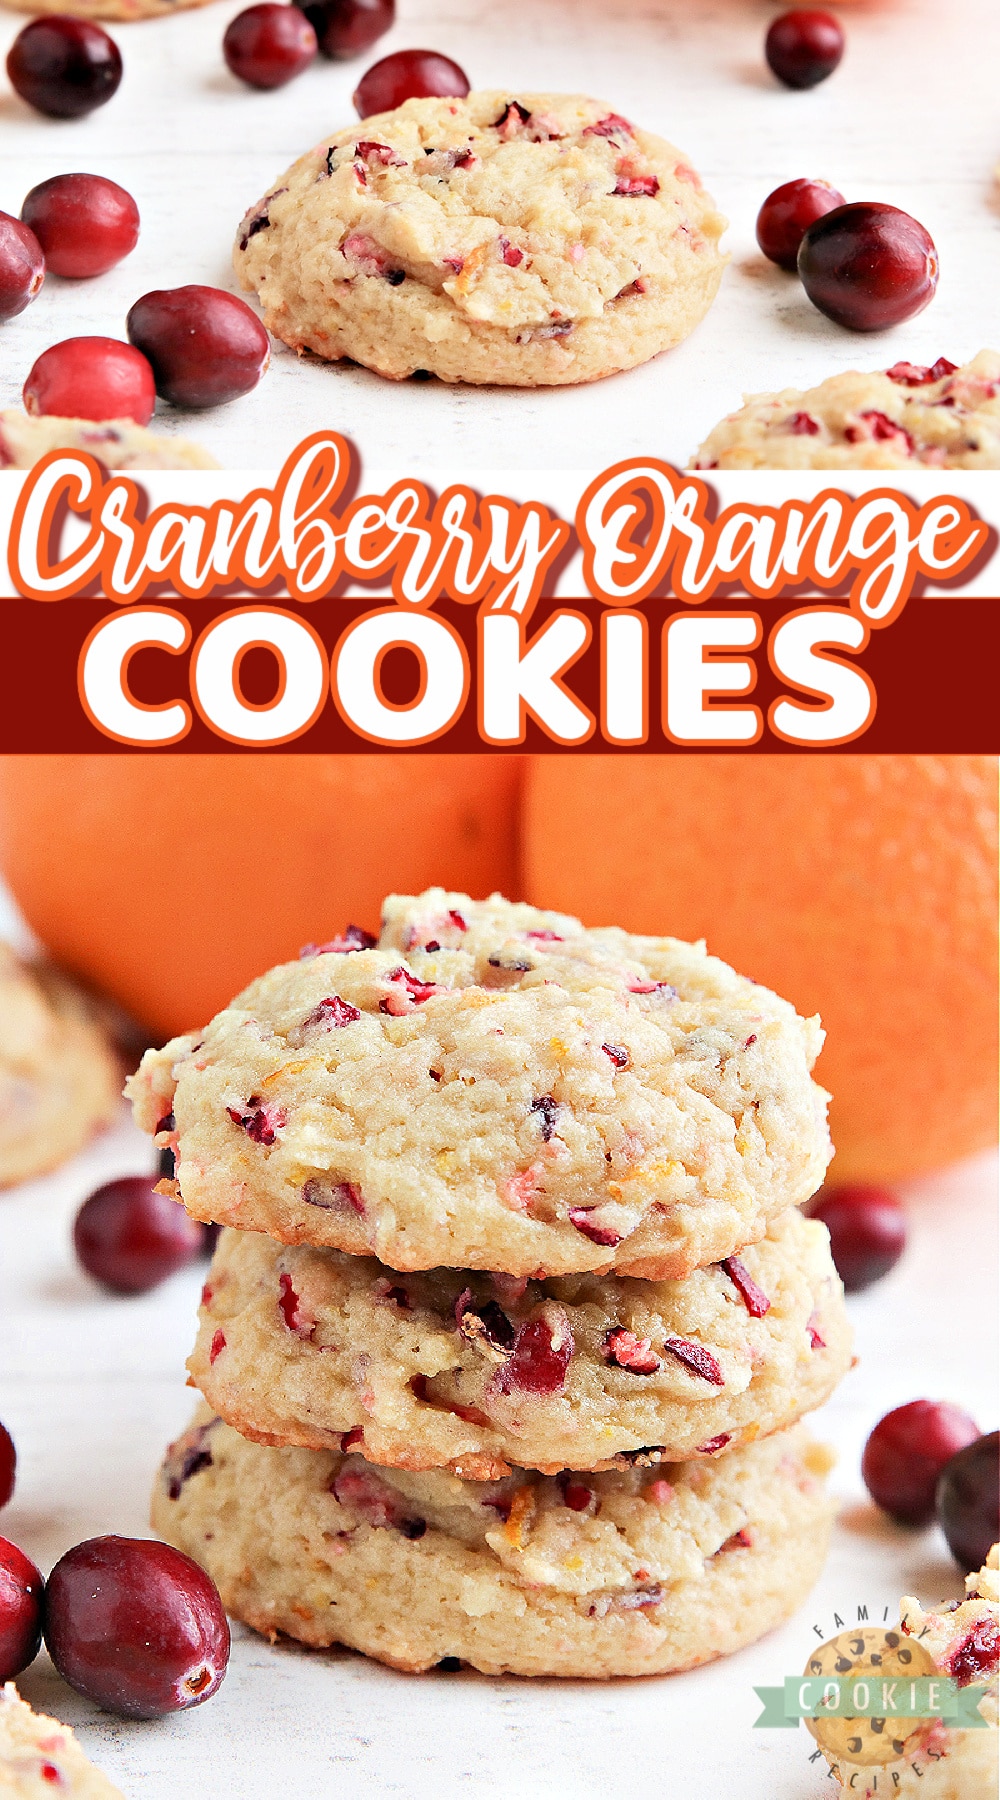 Cranberry Orange Cookies are soft, chewy and packed with orange flavor and fresh cranberries. The perfect cookie recipe for fall! via @buttergirls